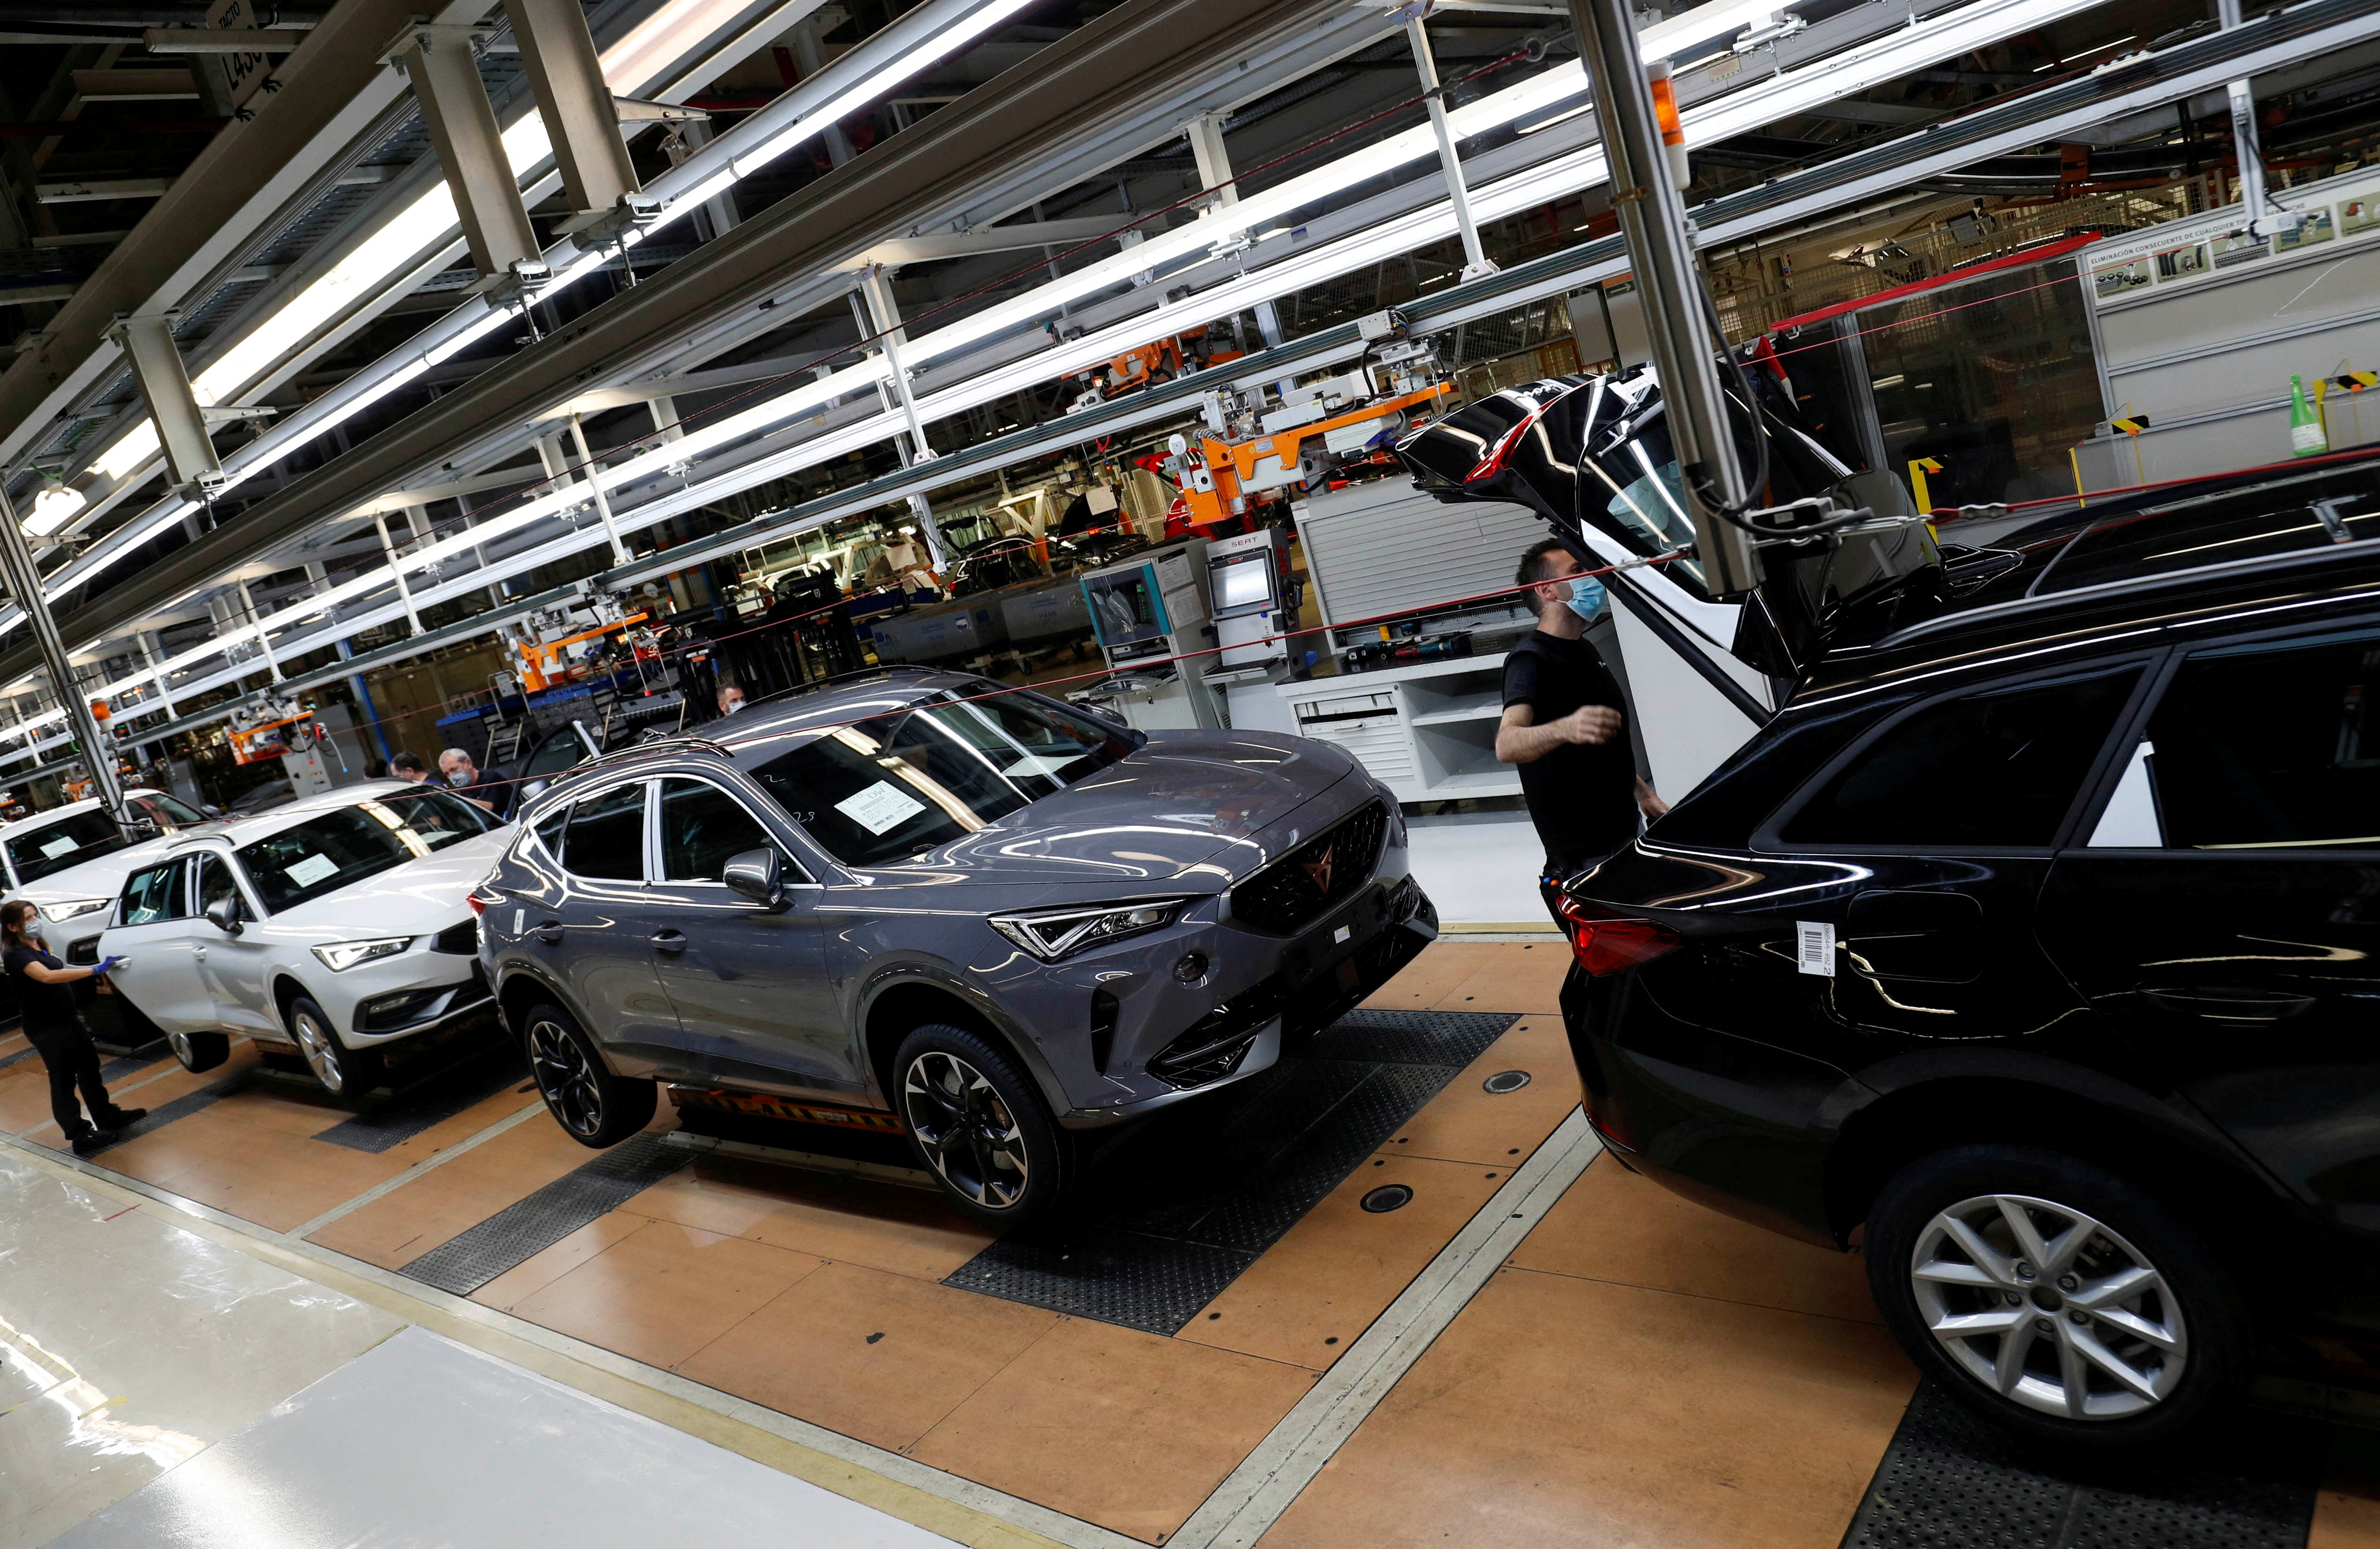 Assembly line of the new Formentor car by SEAT Cupra, in Martorell